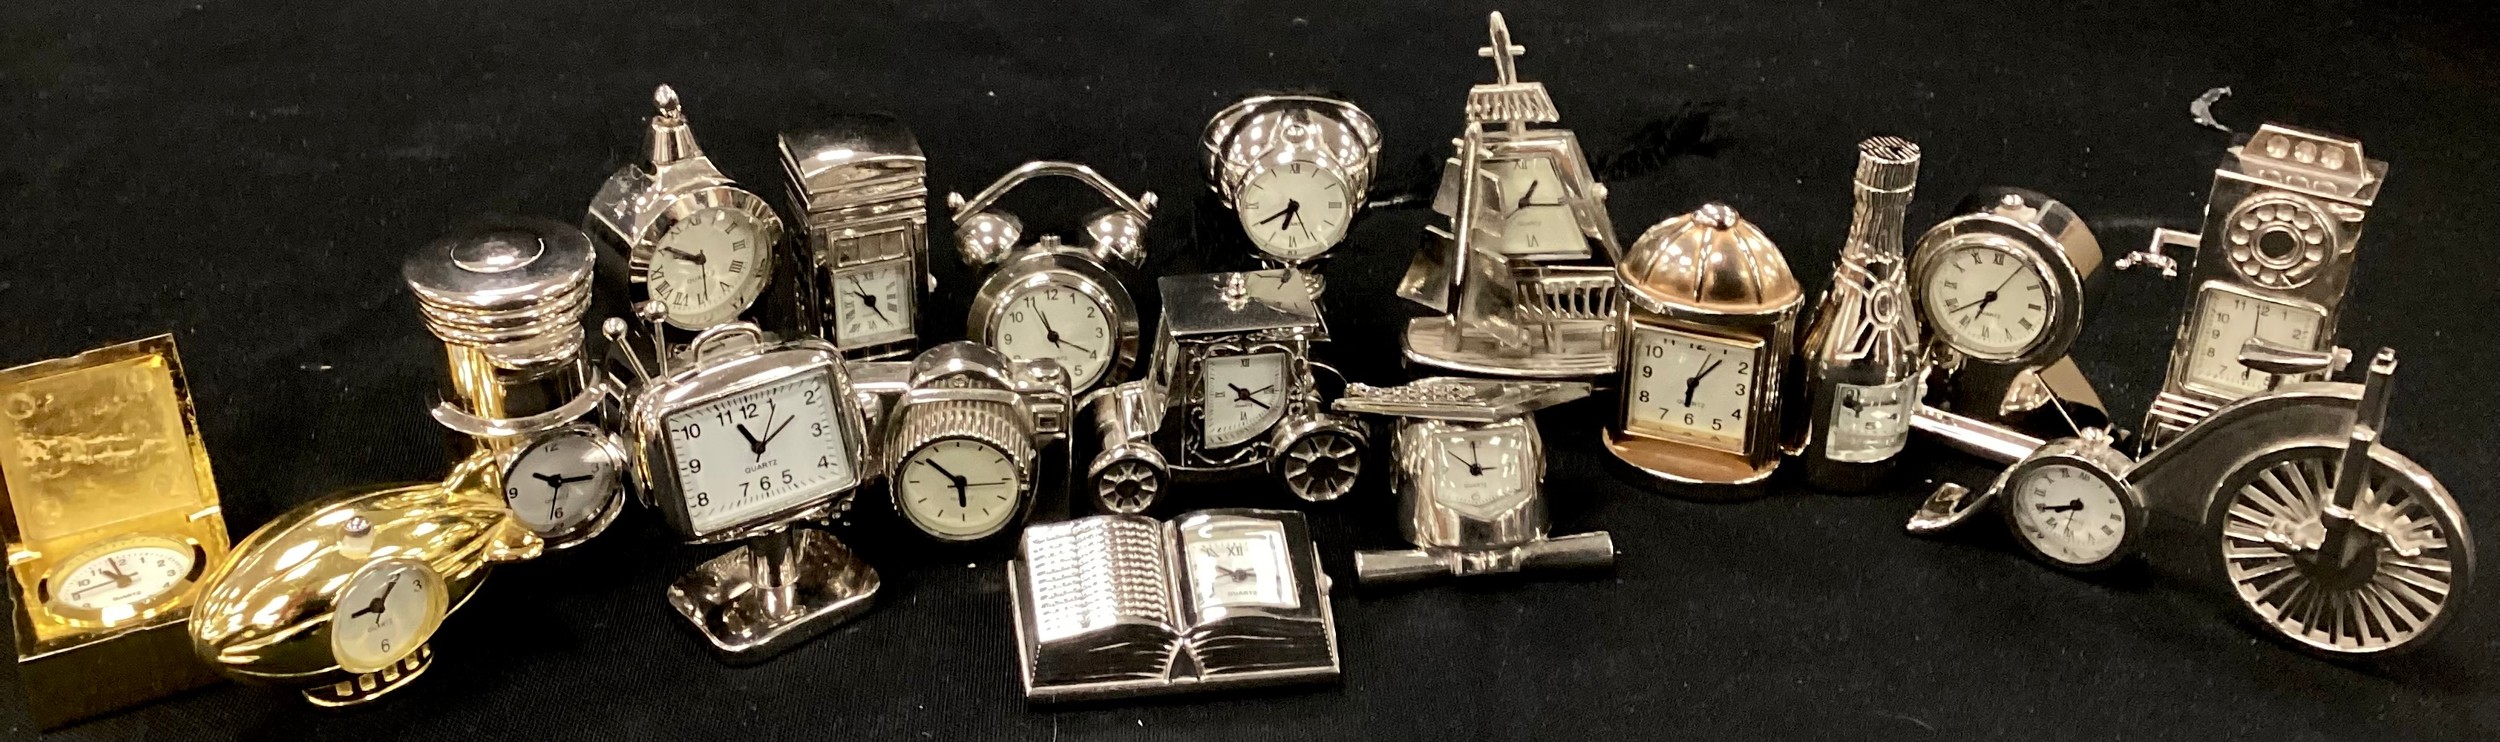 Boxes & Objests - assorted Novelty miniature time pieces, as Boat, book, camera, champagne bottle - Image 2 of 2